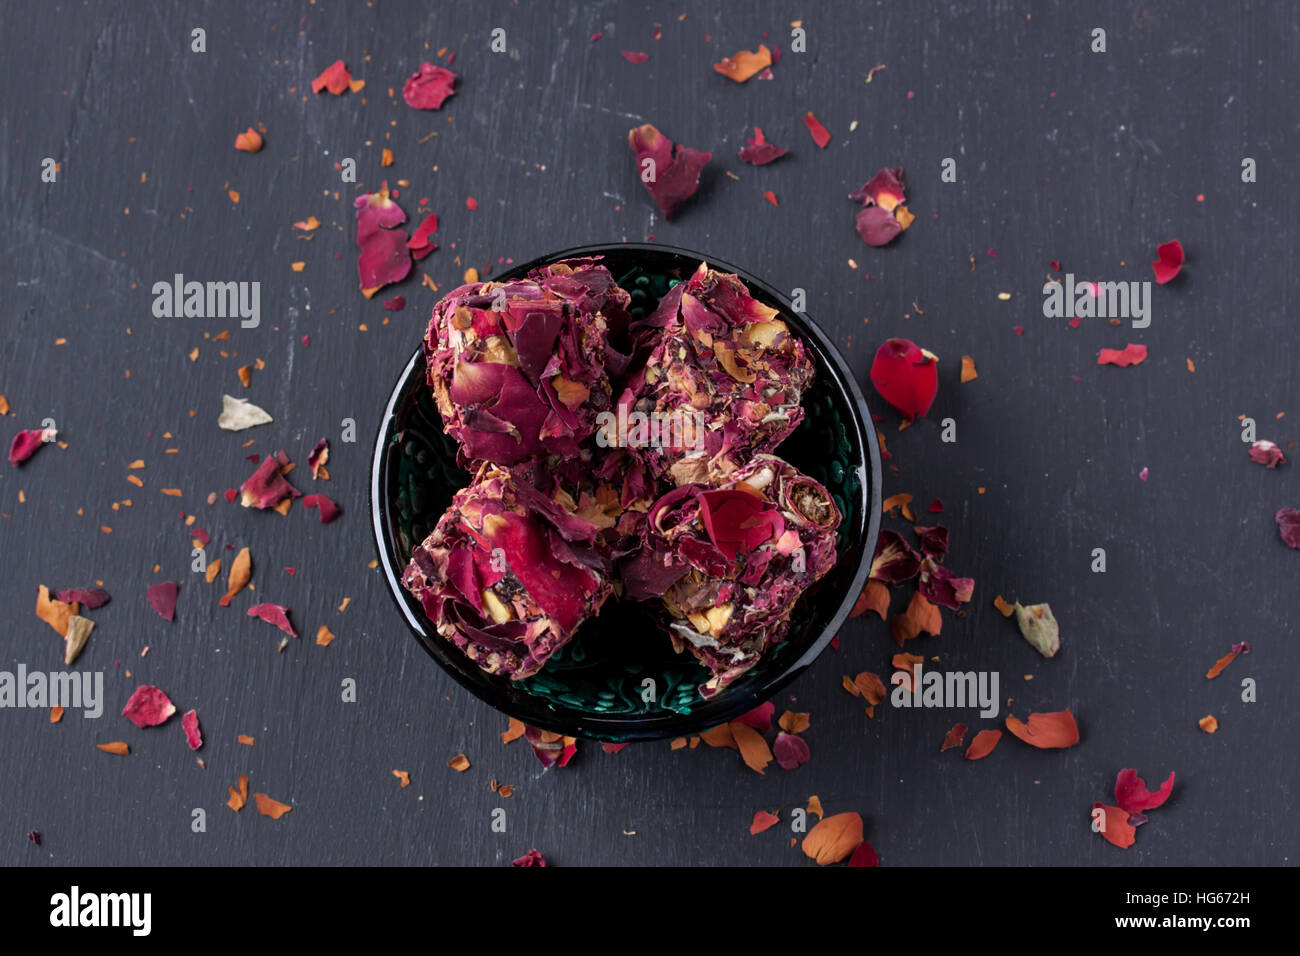 Turkish delight with rose leaves Stock Photo